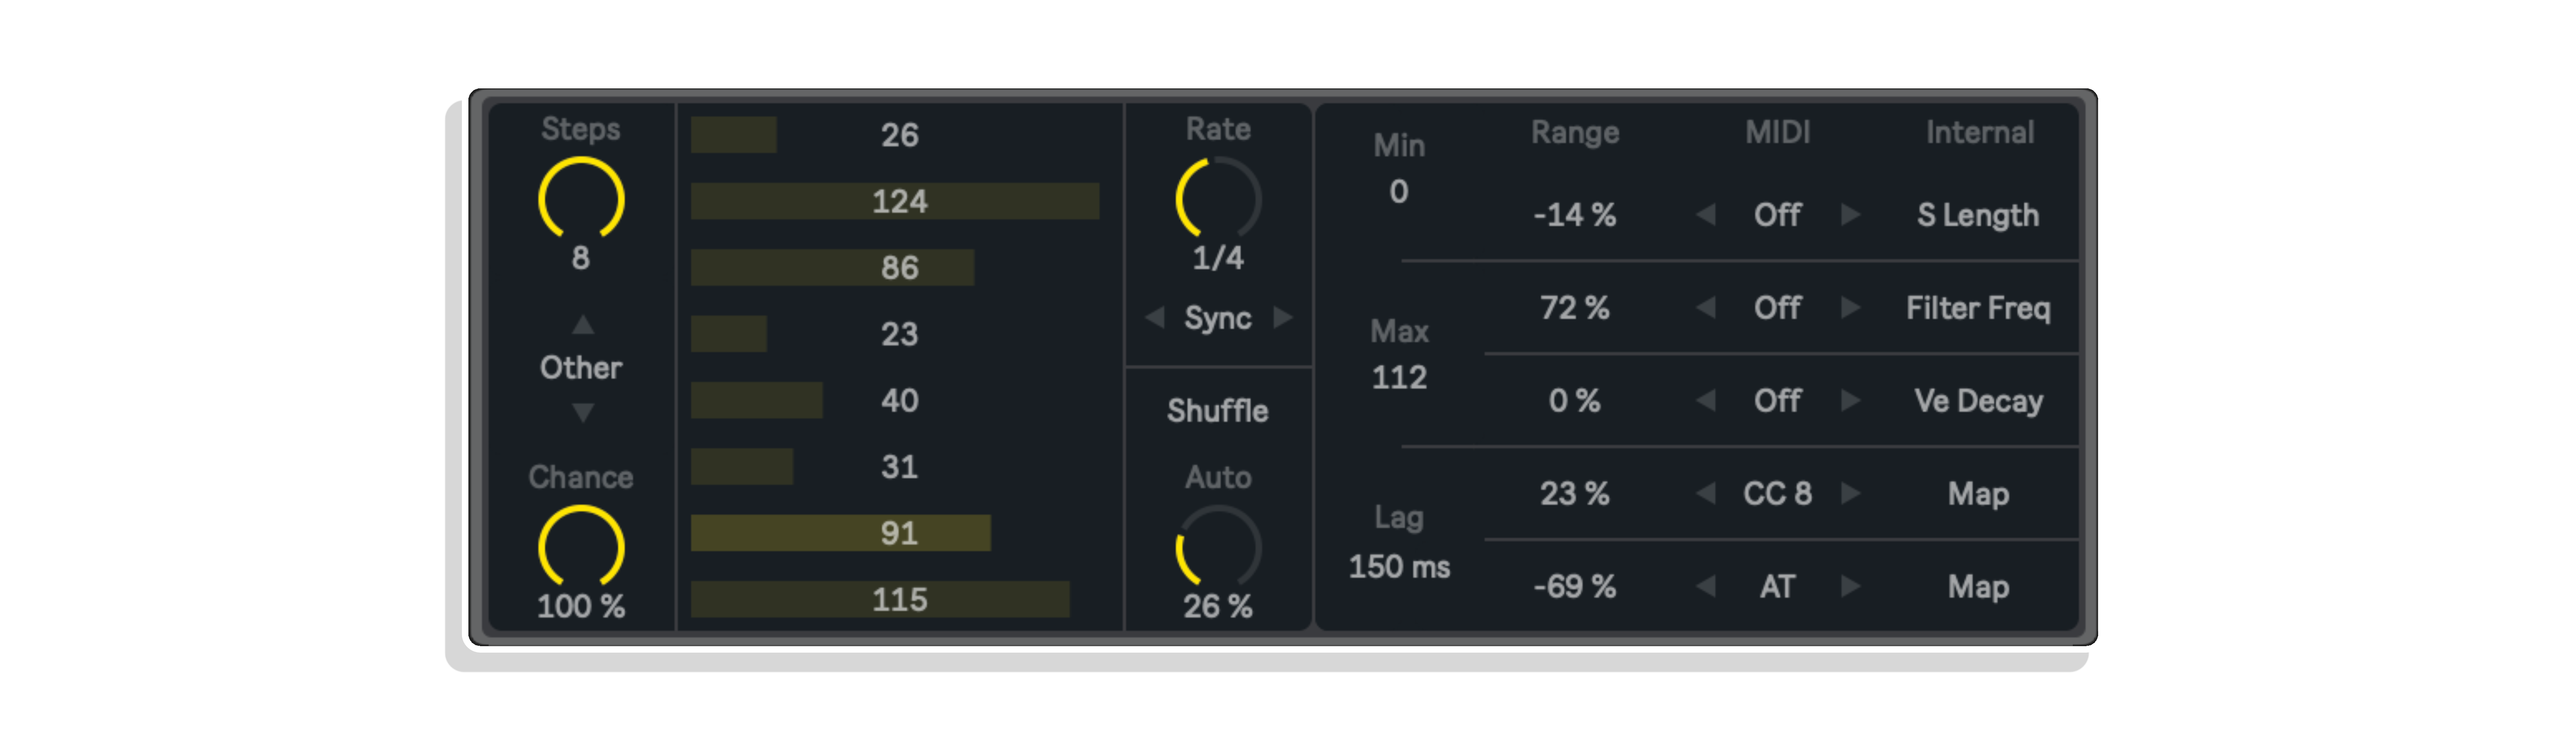 Stairway MaxforLive Device for Ableton Live by NOISS COKO